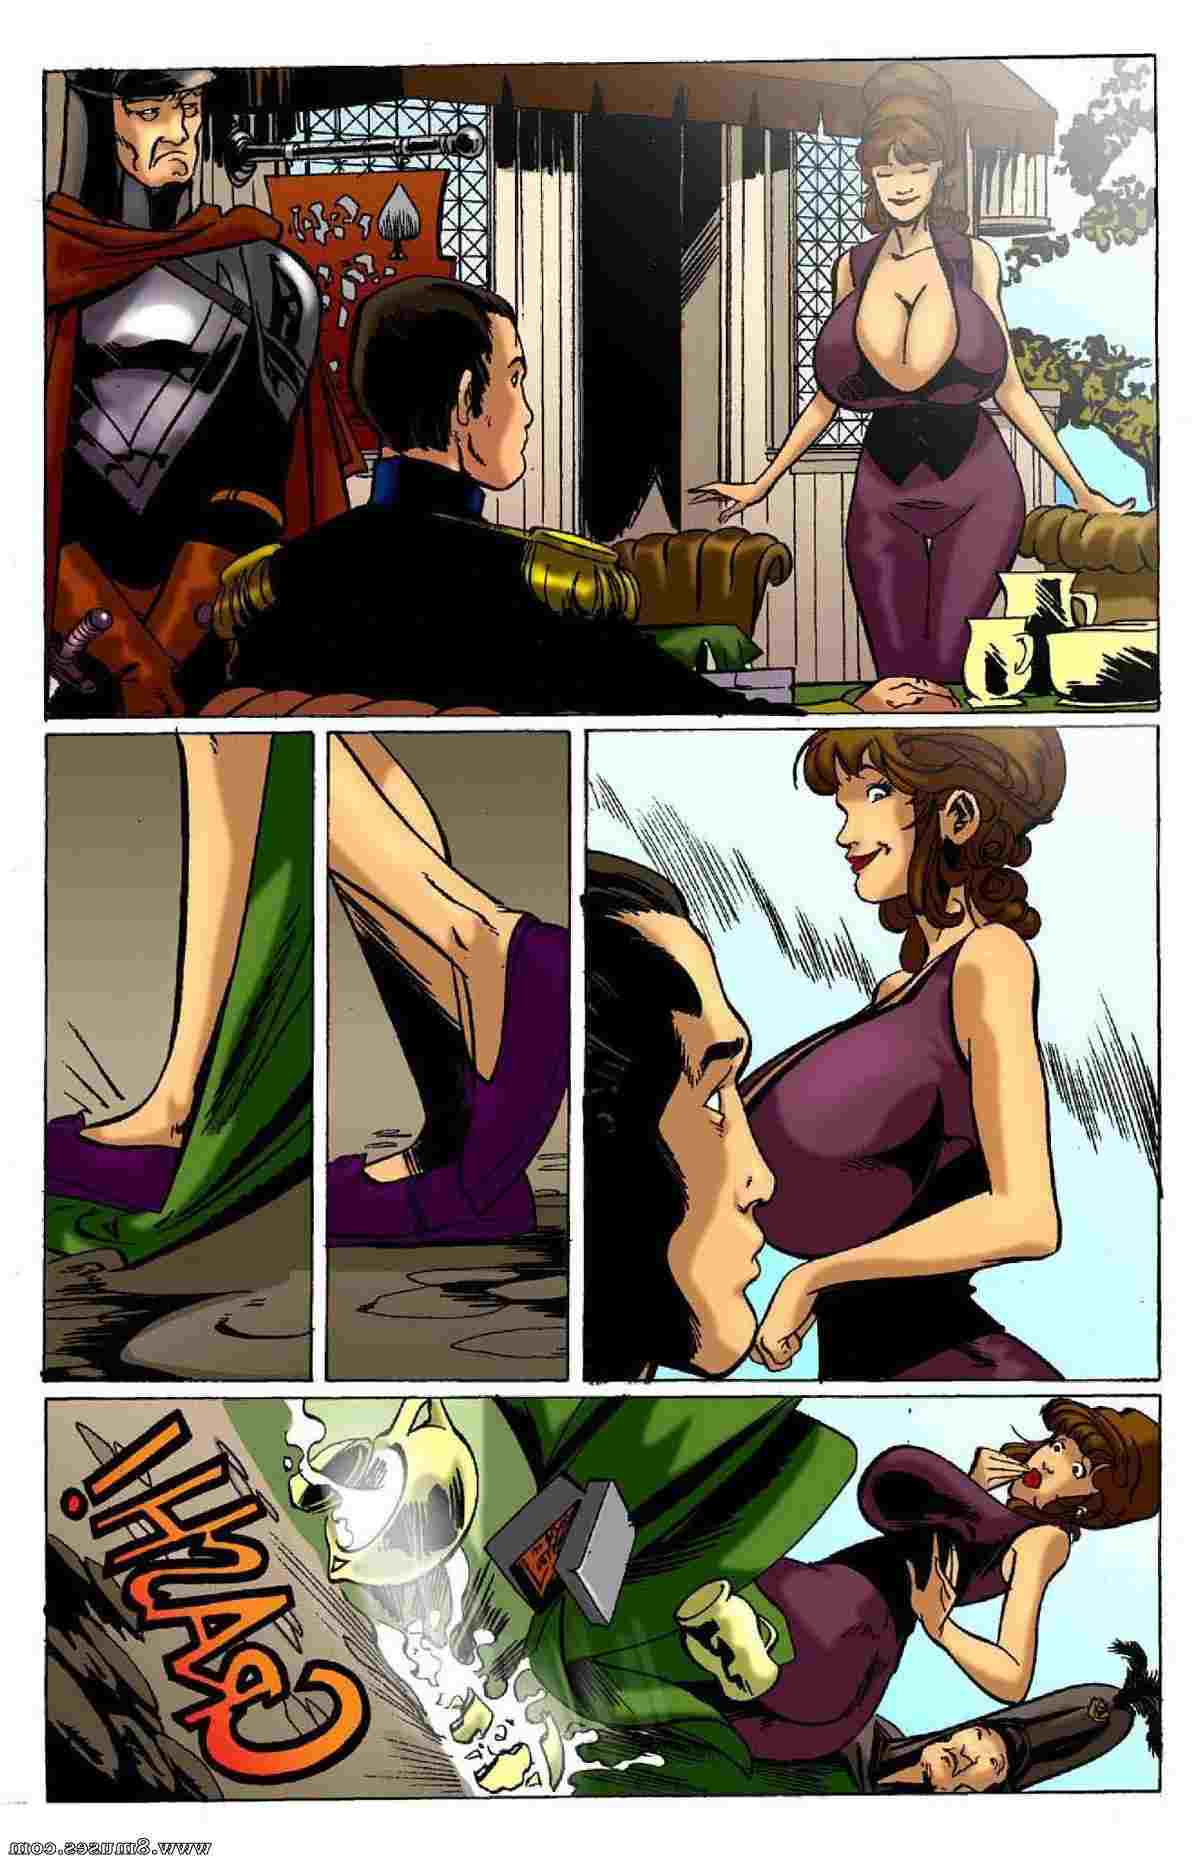 BE-Story-Club-Comics/Unstable-Assets Unstable_Assets__8muses_-_Sex_and_Porn_Comics_15.jpg